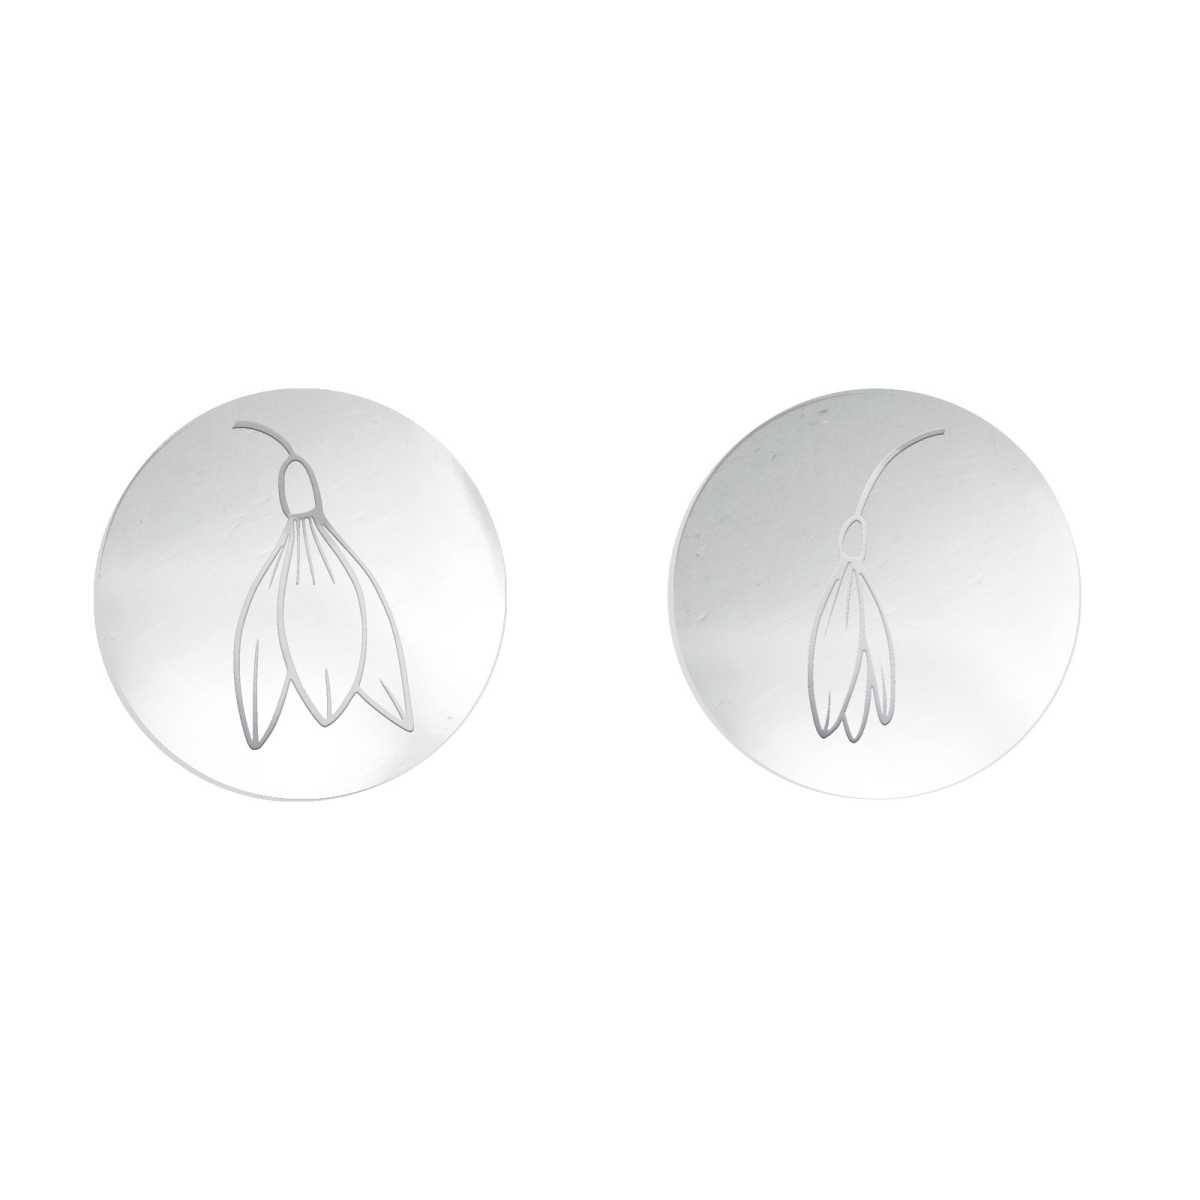 Birth Flower Stud Earrings- | Mali's Fashion Jewelry  Mali's  32  Metal Part: Sterling Silver  - Birth Month Flower and blossom 